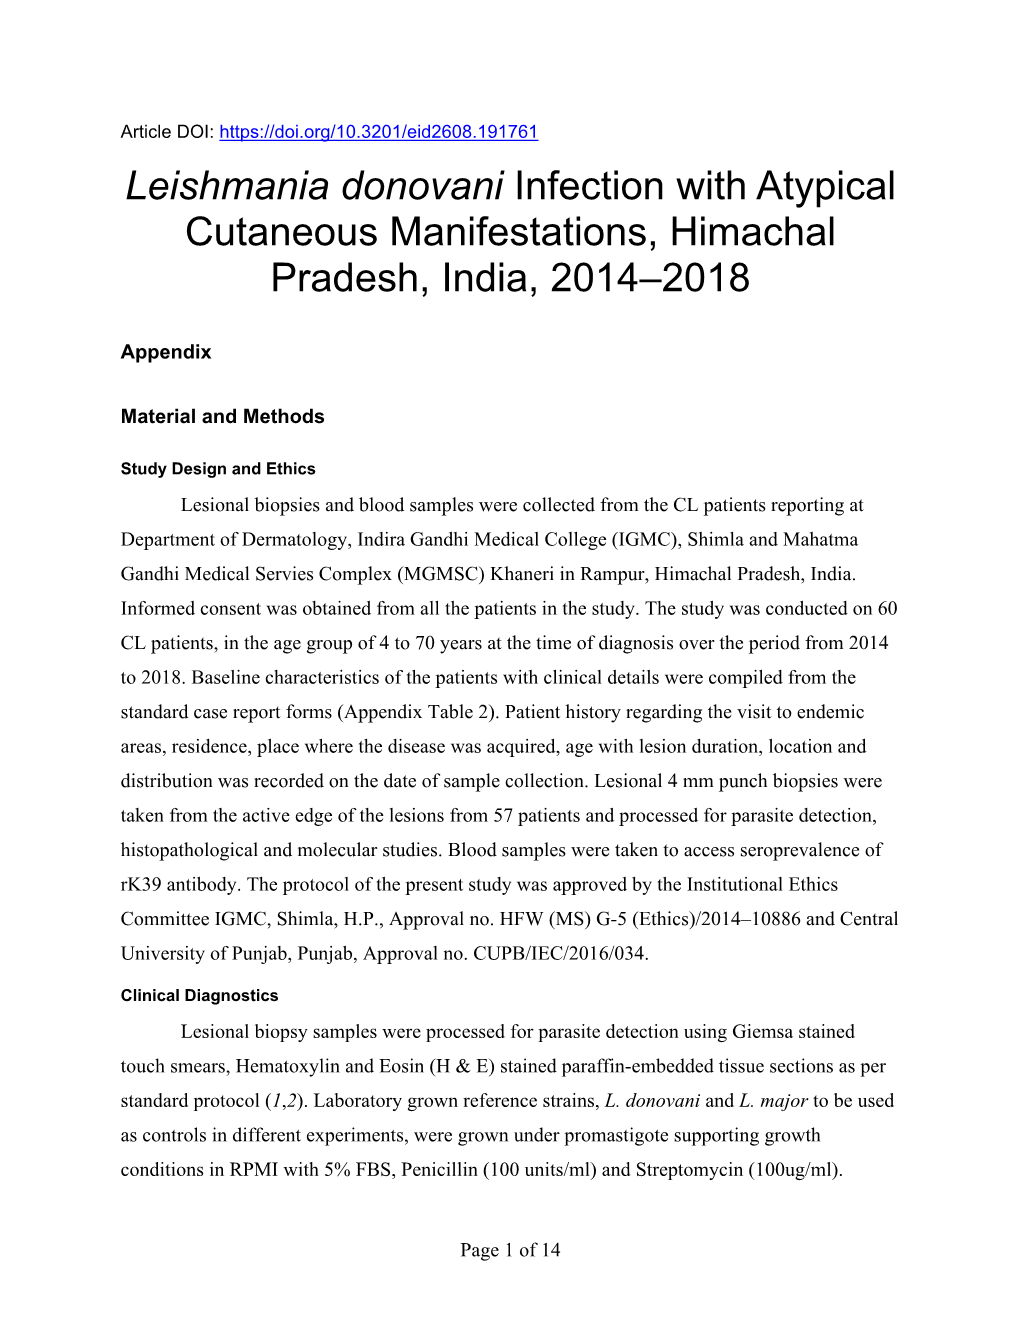 Leishmania Donovani Infection with Atypical Cutaneous Manifestations, Himachal Pradesh, India, 2014–2018